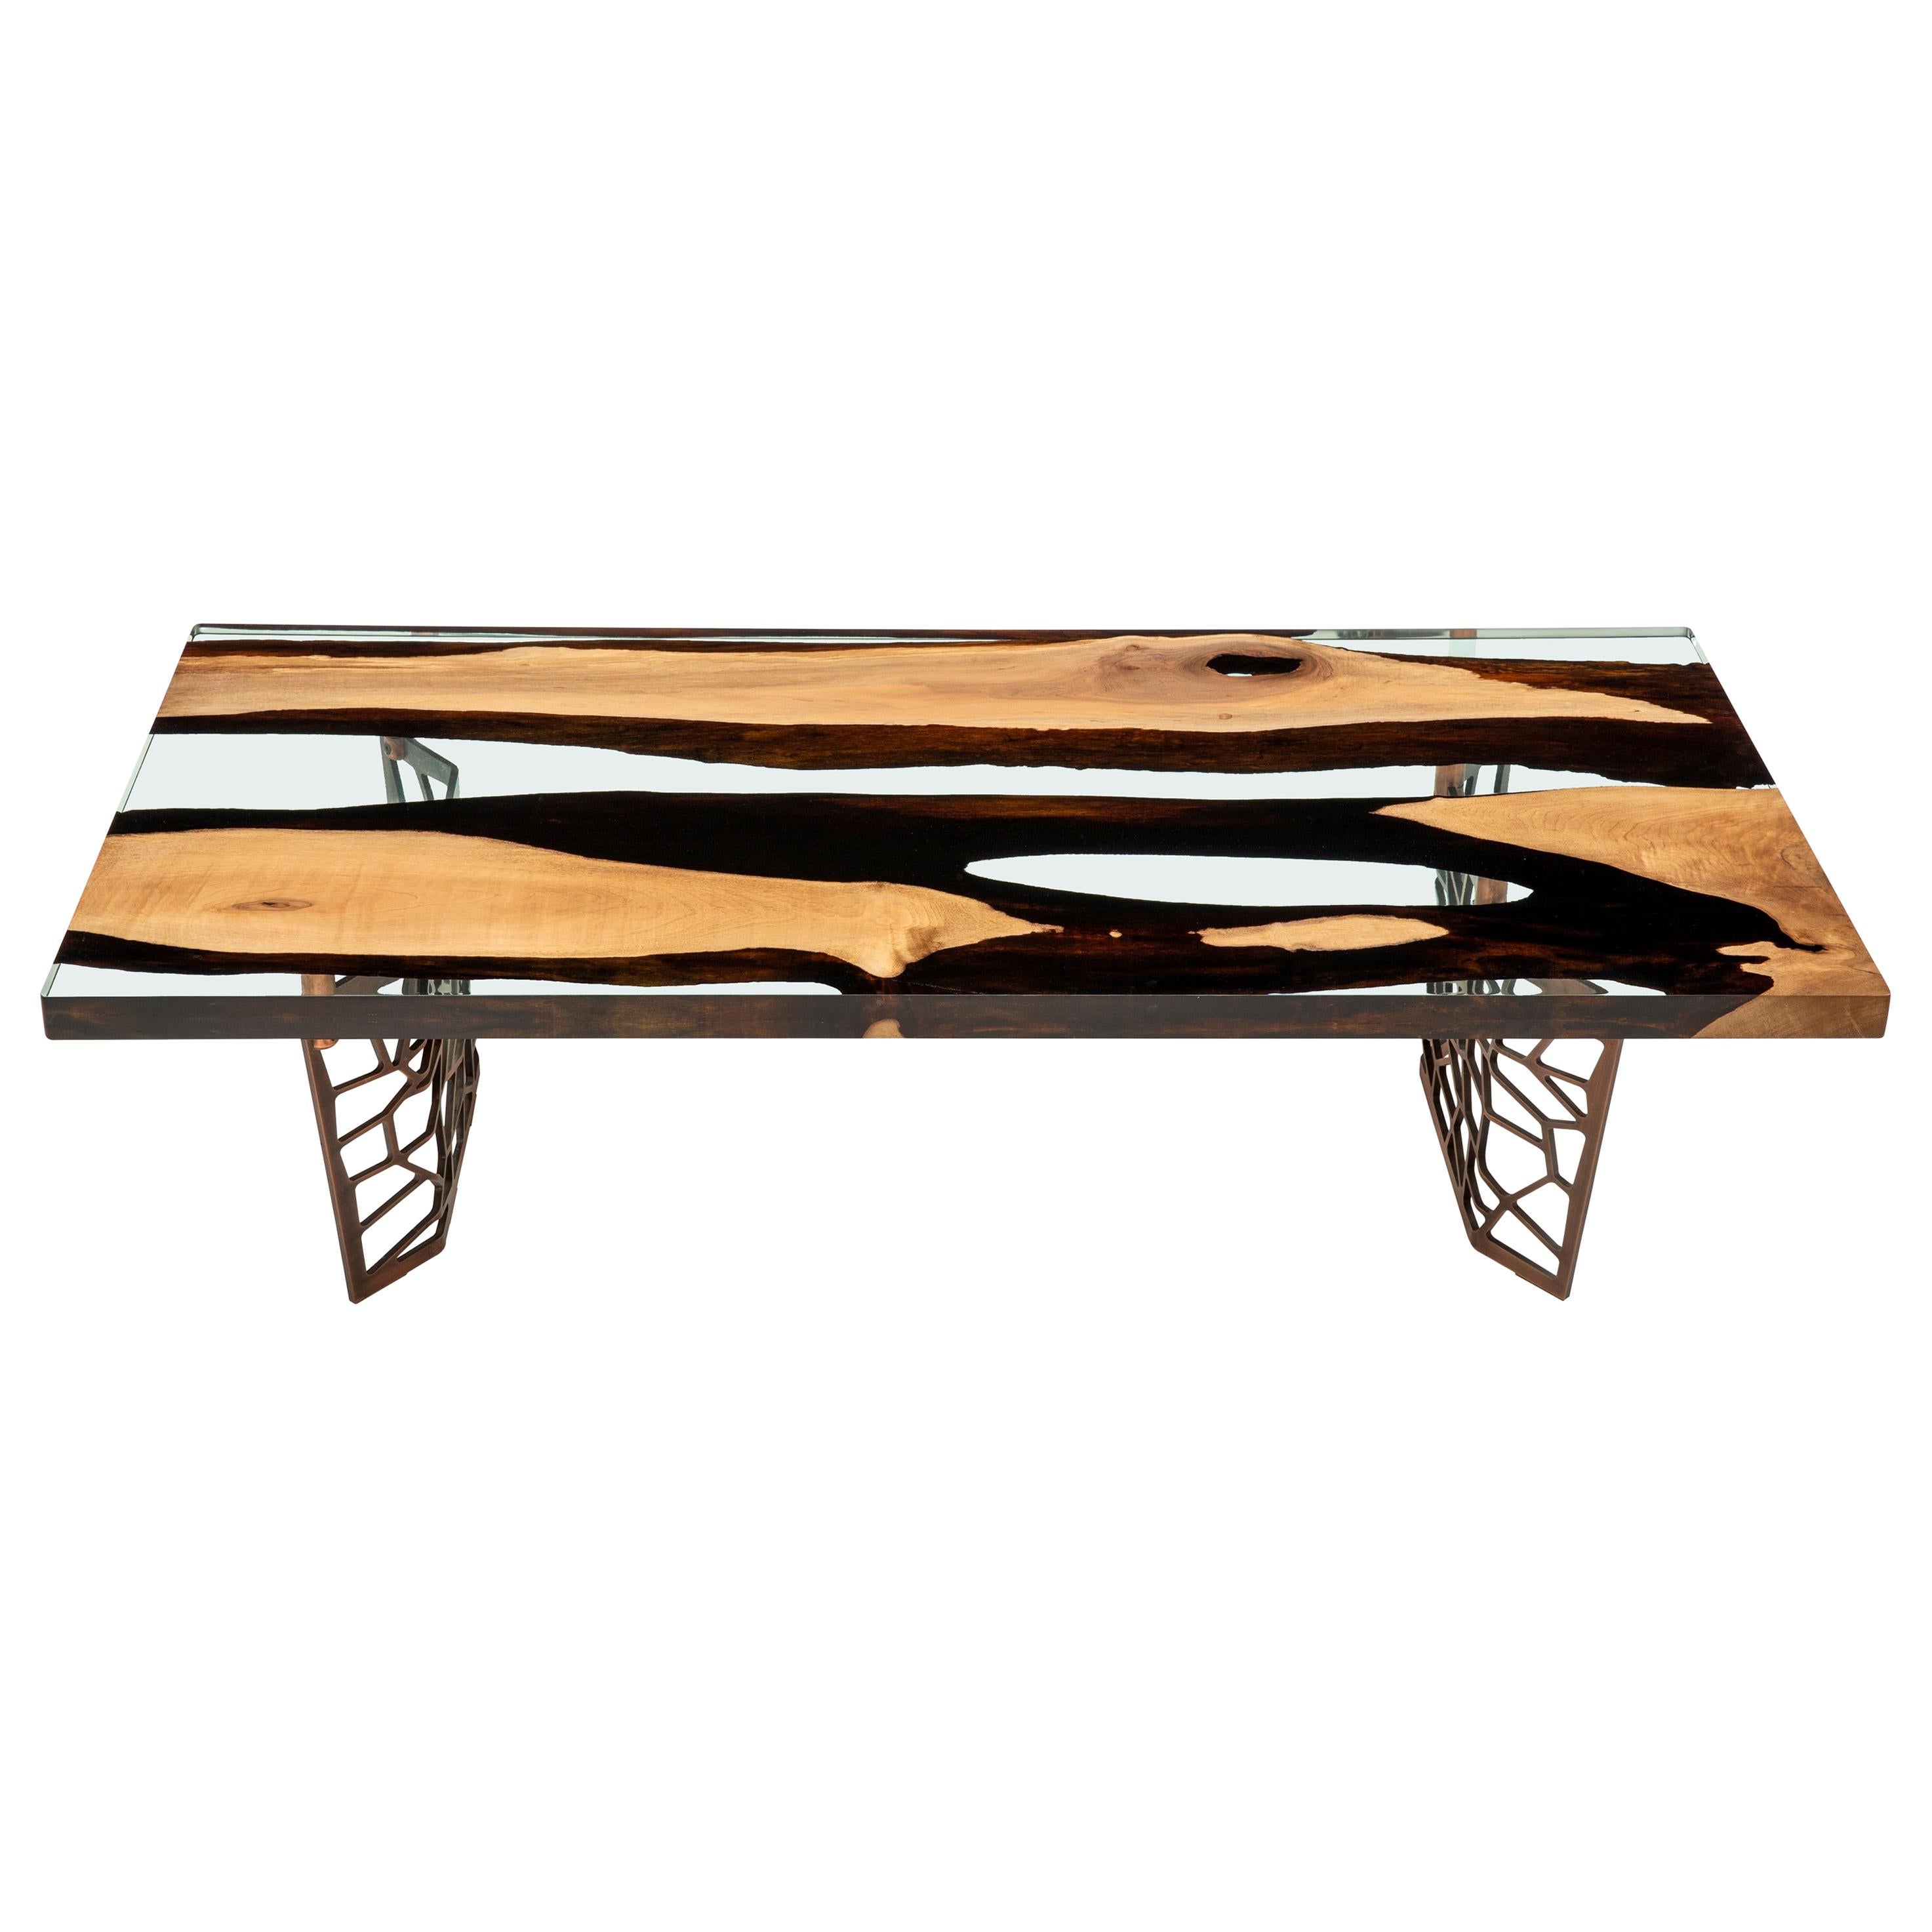 Primitive 160 Epoxy Resin Coffee Table For Sale